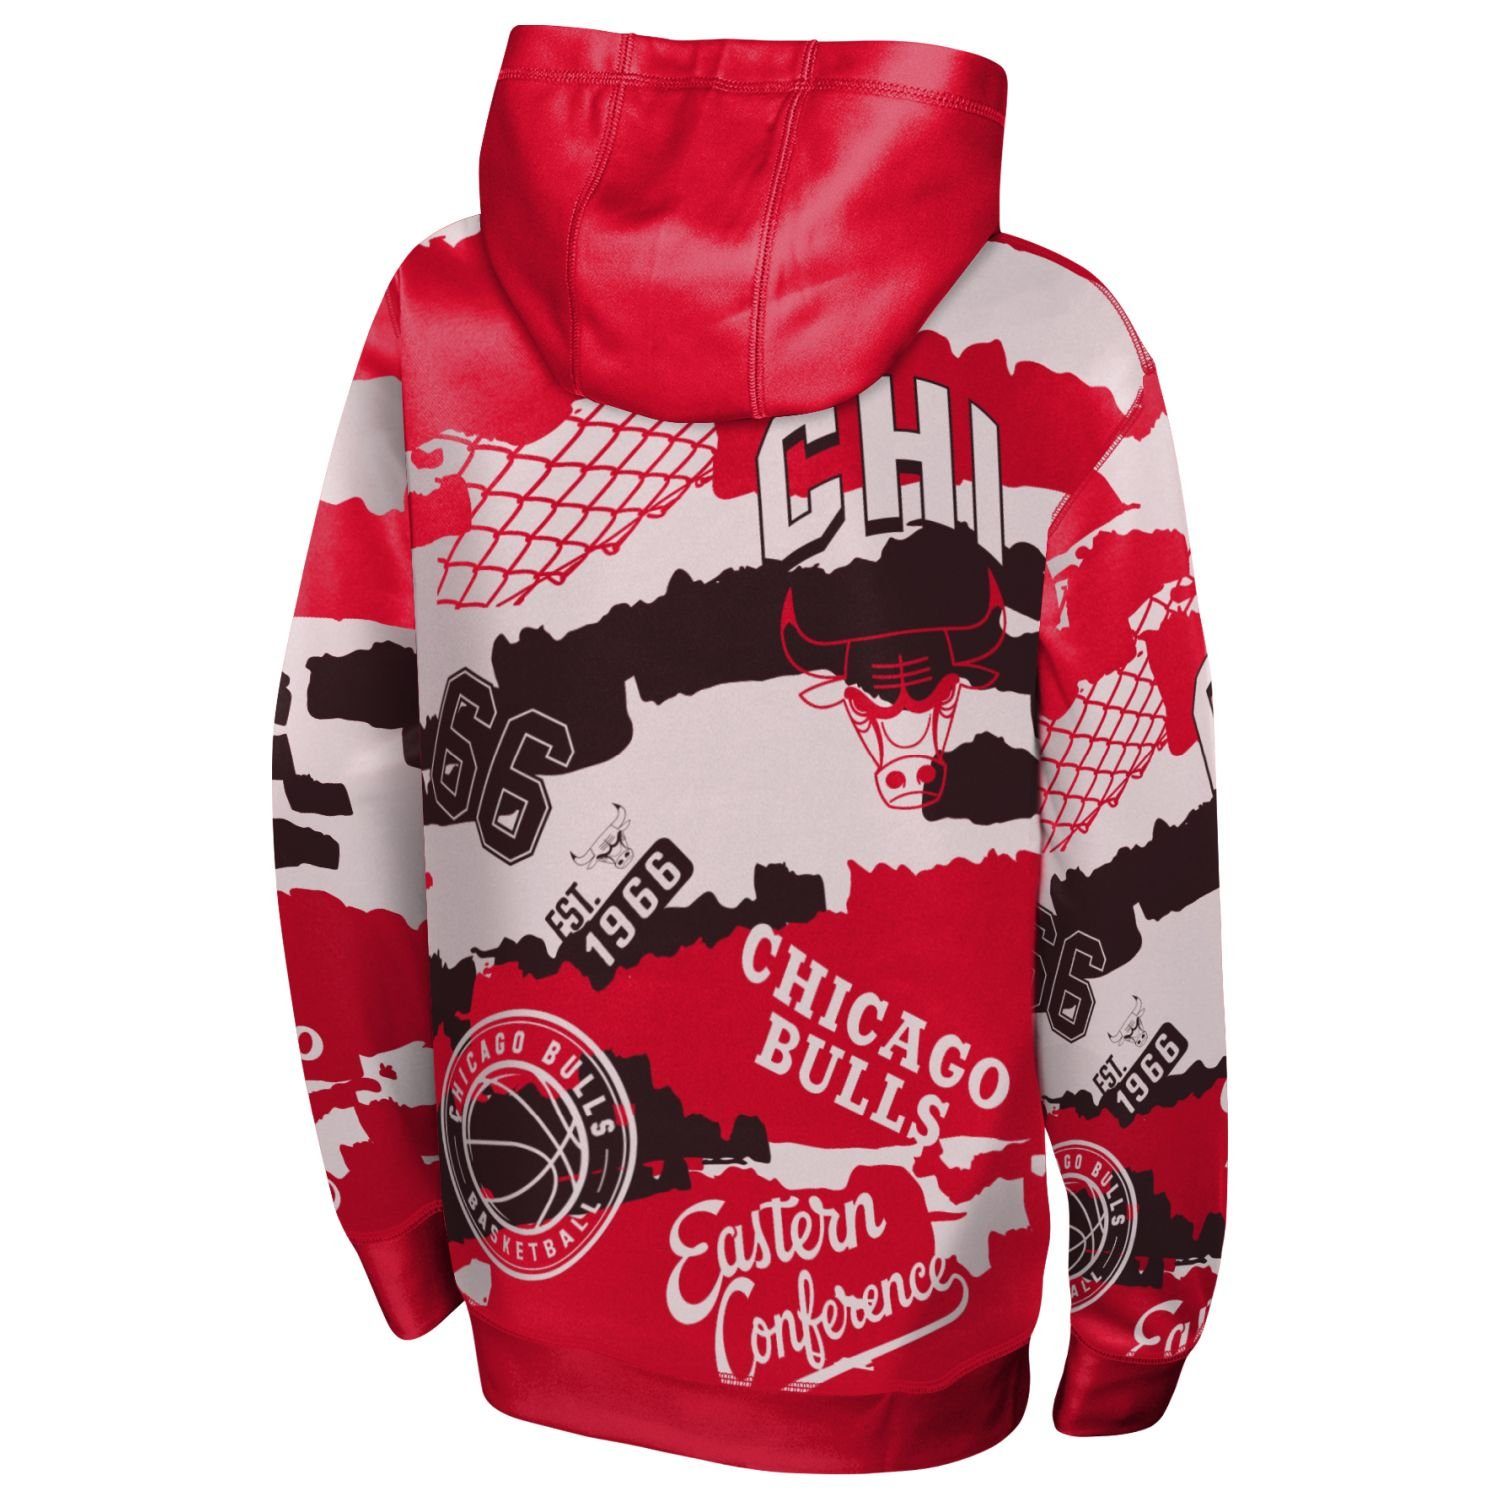 Outerstuff Kapuzenpullover NBA Sublimated LIMIT THE Bulls Chicago